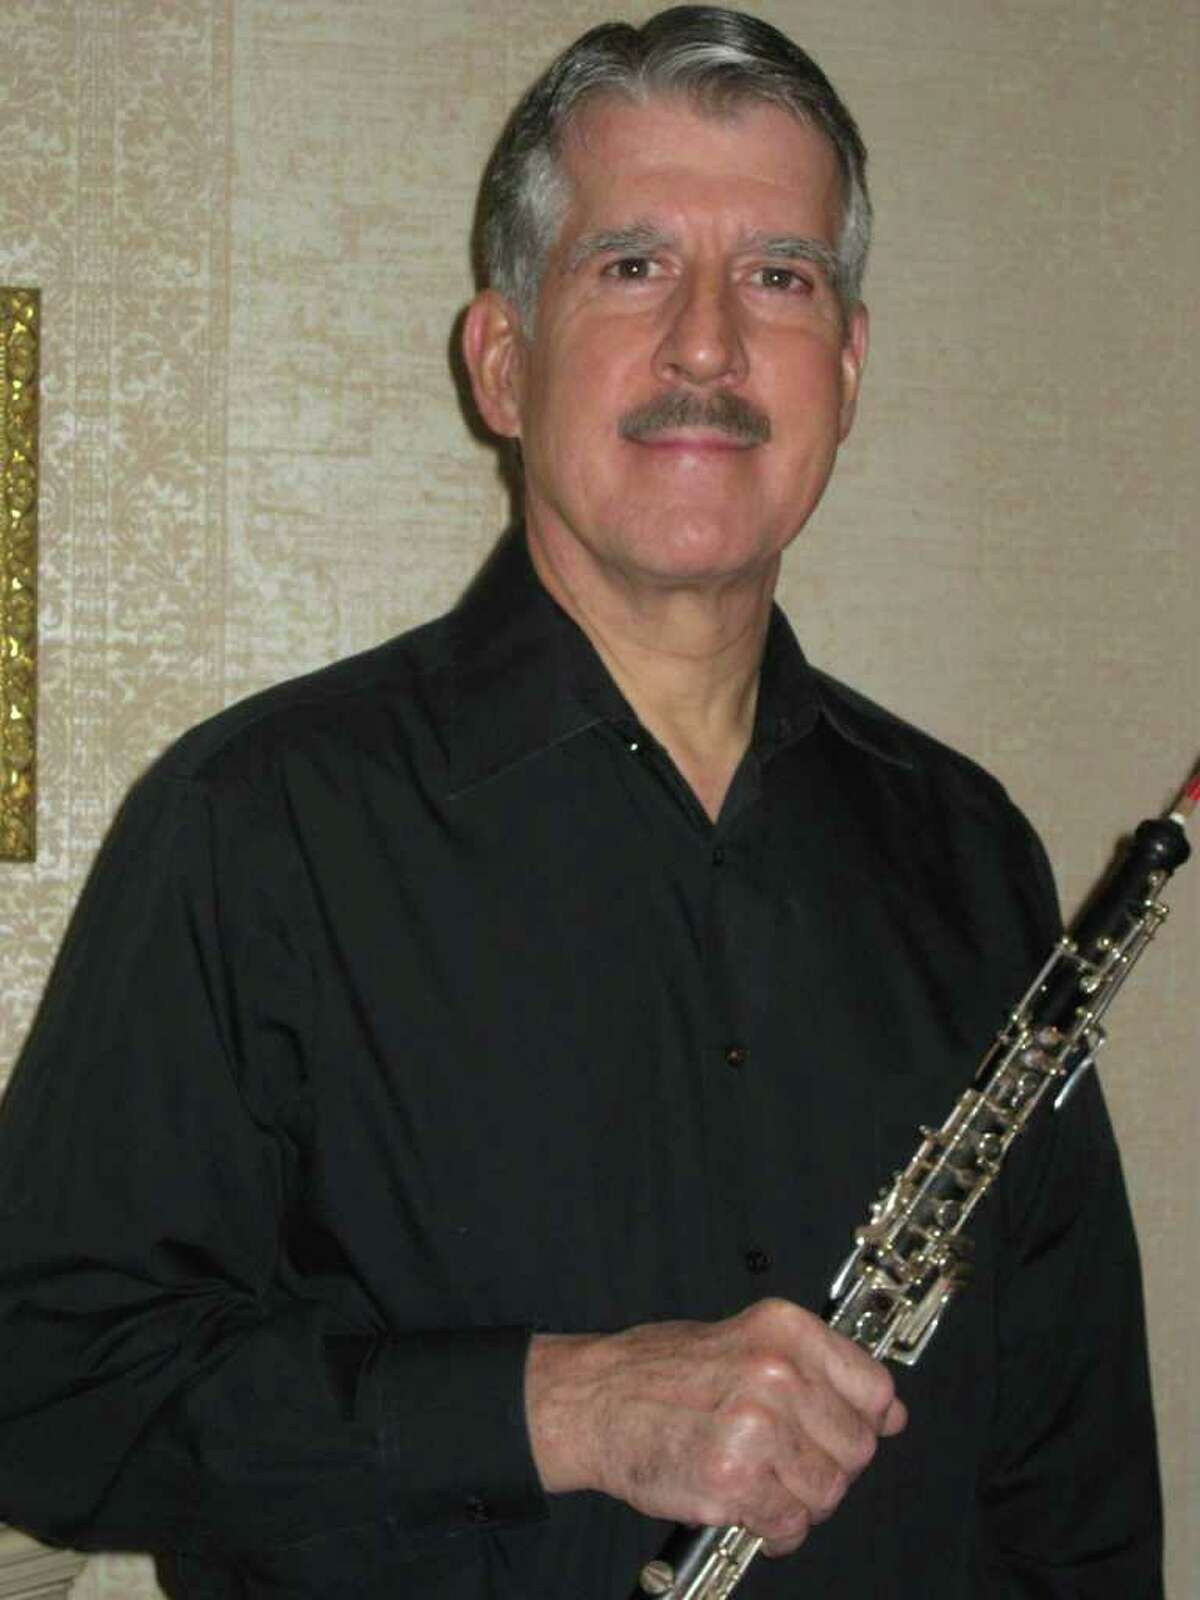 Ralph Kirmser, an oboe player and longtime Wilton resident, will perform with a chamber trio on Sunday, Nov. 6, from 4 to 5 p.m., to kick off Wilton Library's popular 'Connecticut's Own' concert series.